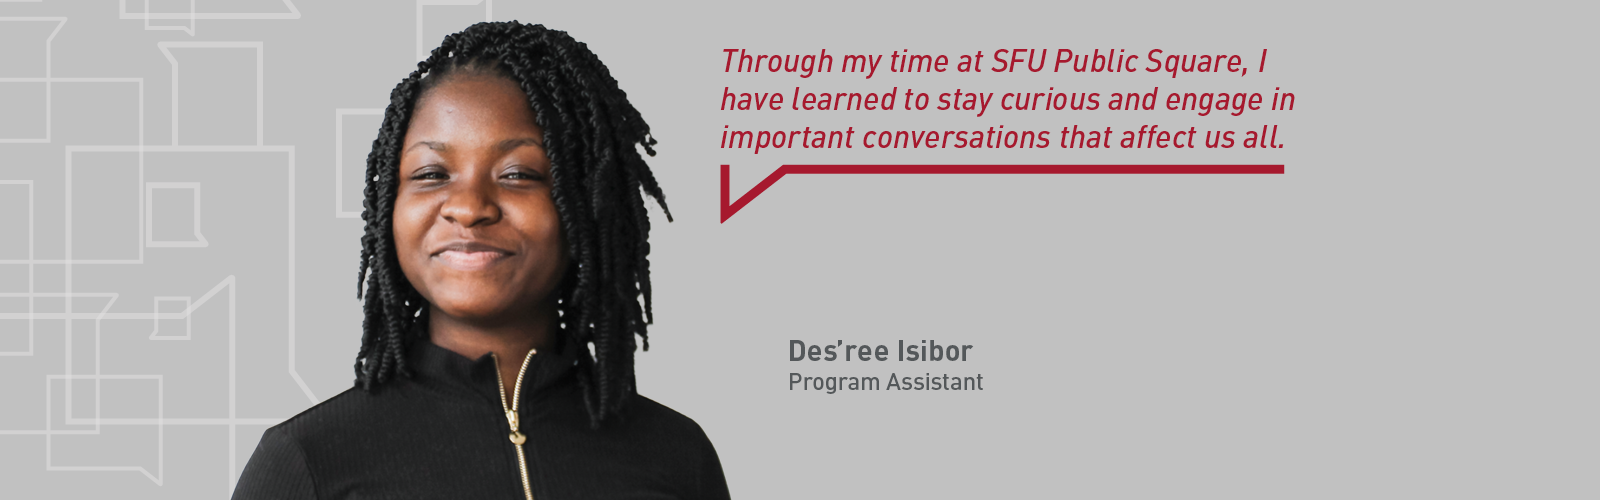 Headshot of program assistant Des'ree Isibor with a quote that reads "Through my time at SFU Public Square, I have learned to stay curious and engage in important conversations that affect us all."